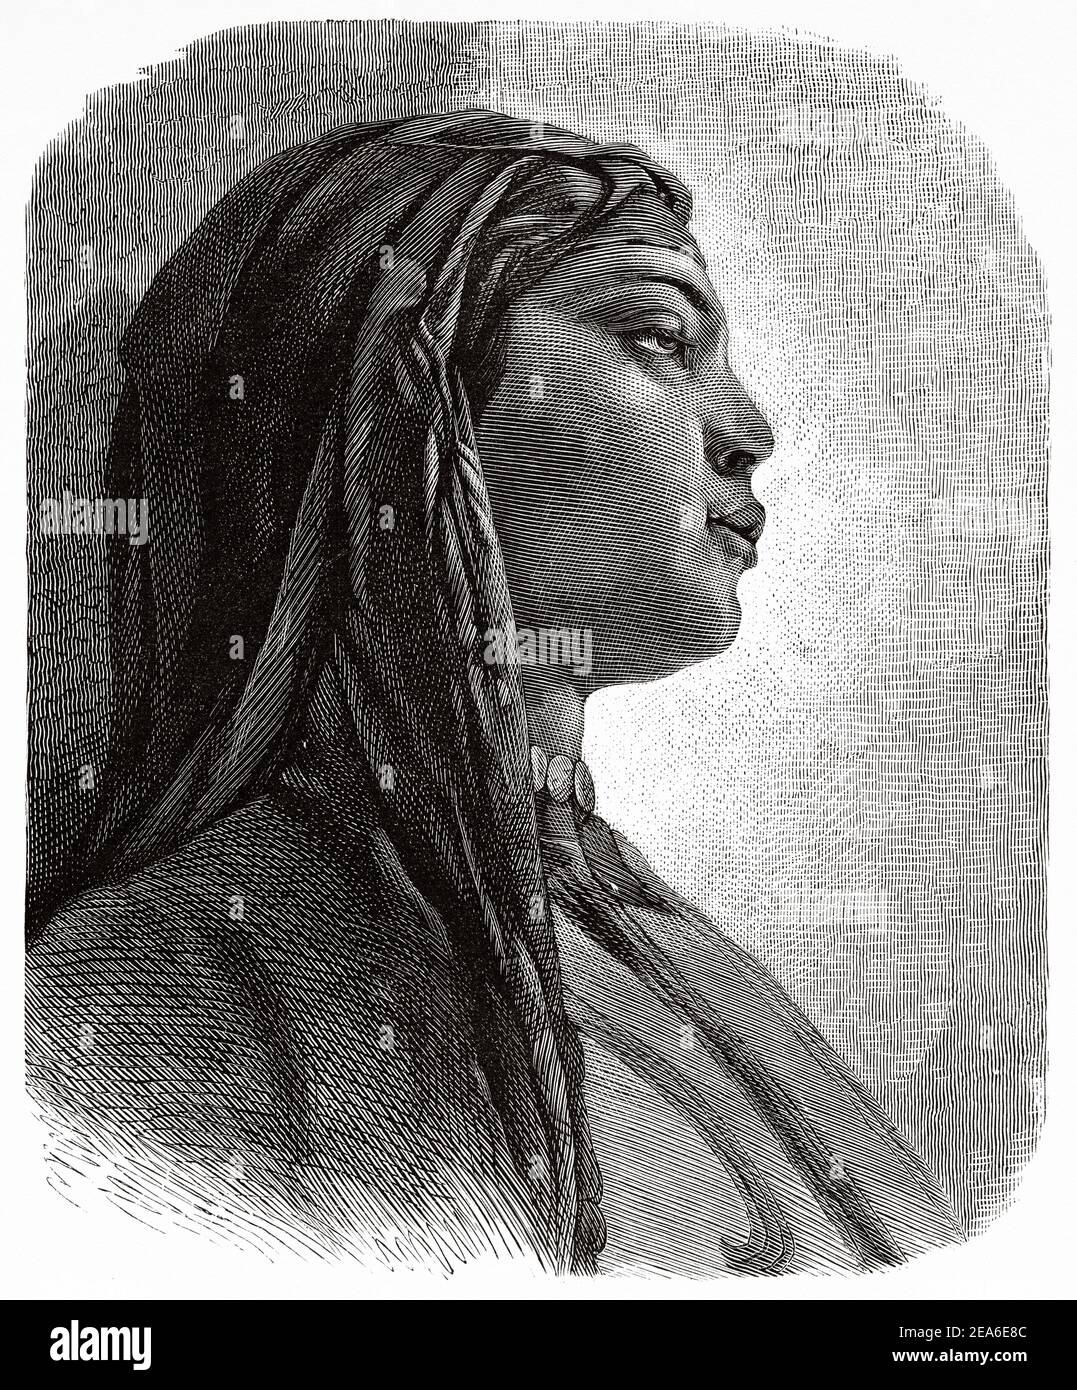 Portrait of a beautiful Egyptian woman dressed in traditional costume. Ancient Egypt History. Old 19th century engraved illustration from El Mundo Ilustrado 1879 Stock Photo